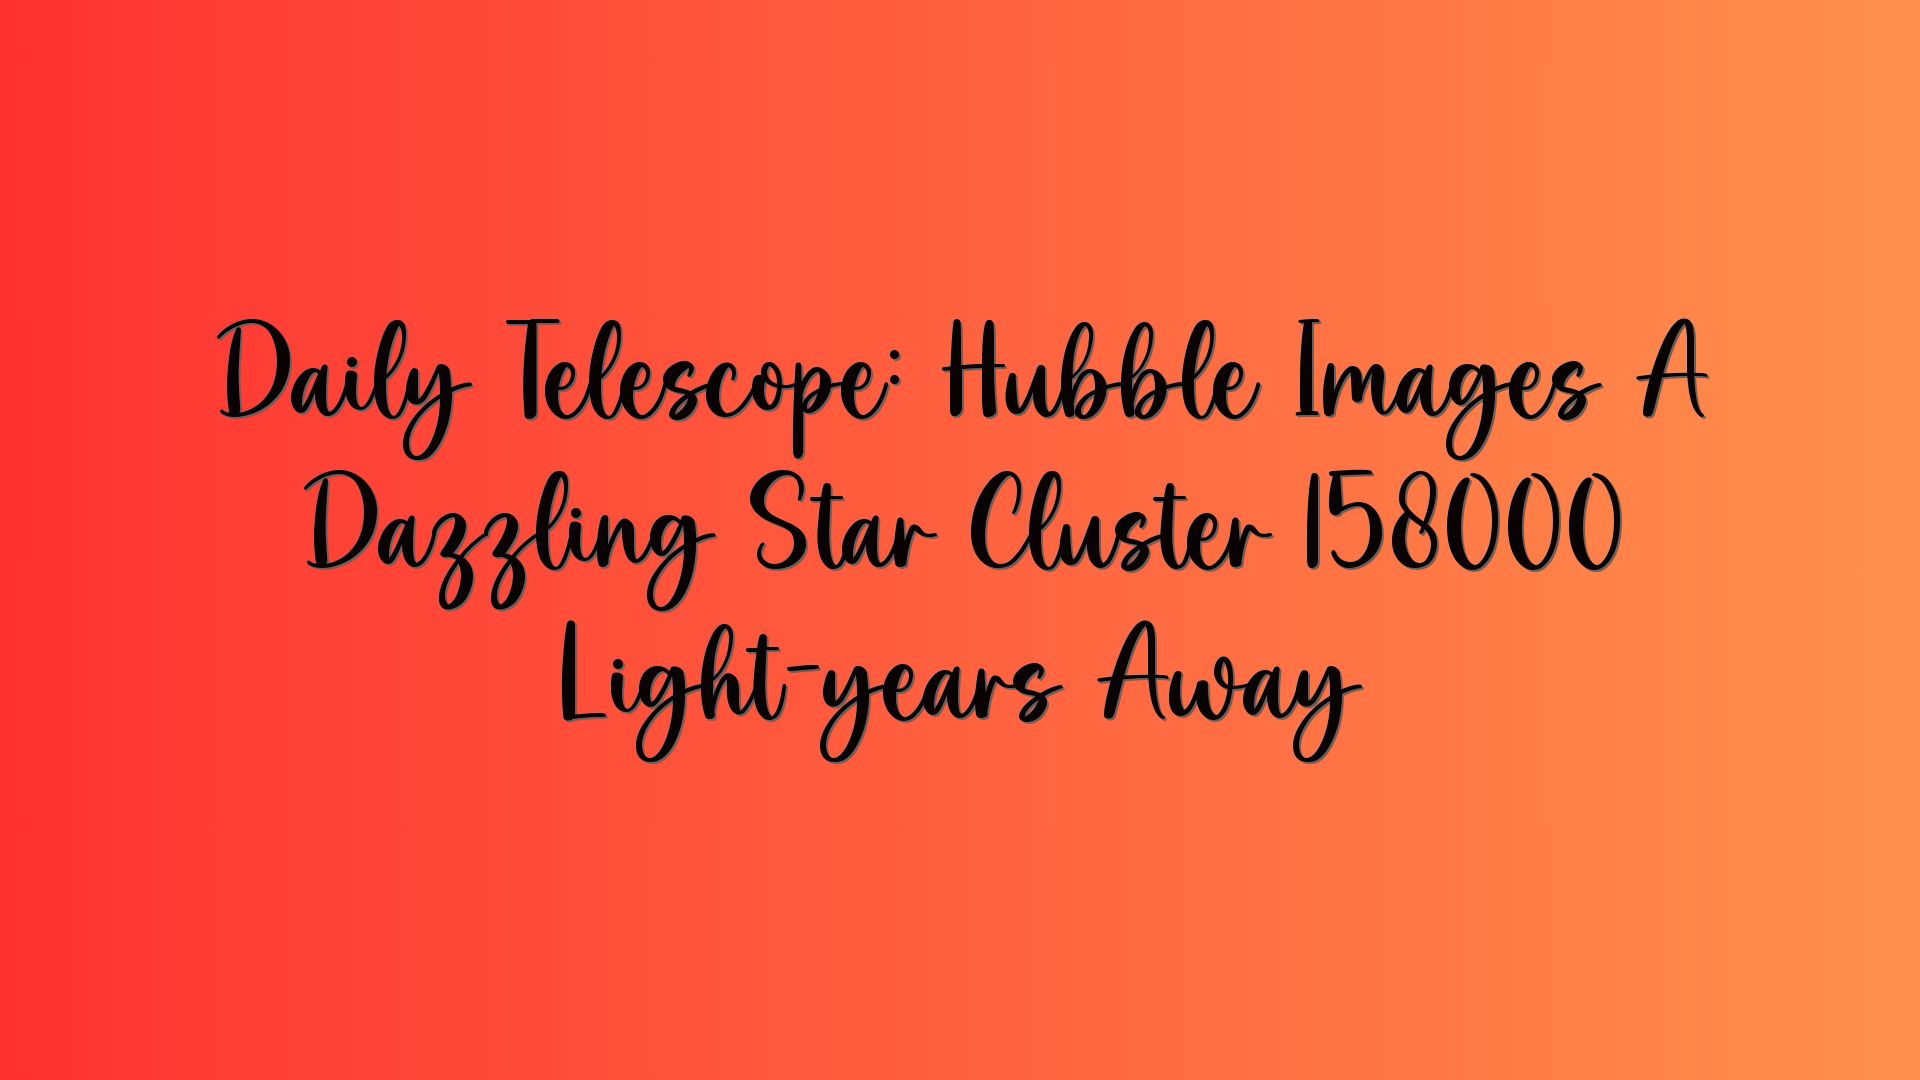 Daily Telescope: Hubble Images A Dazzling Star Cluster 158000 Light-years Away